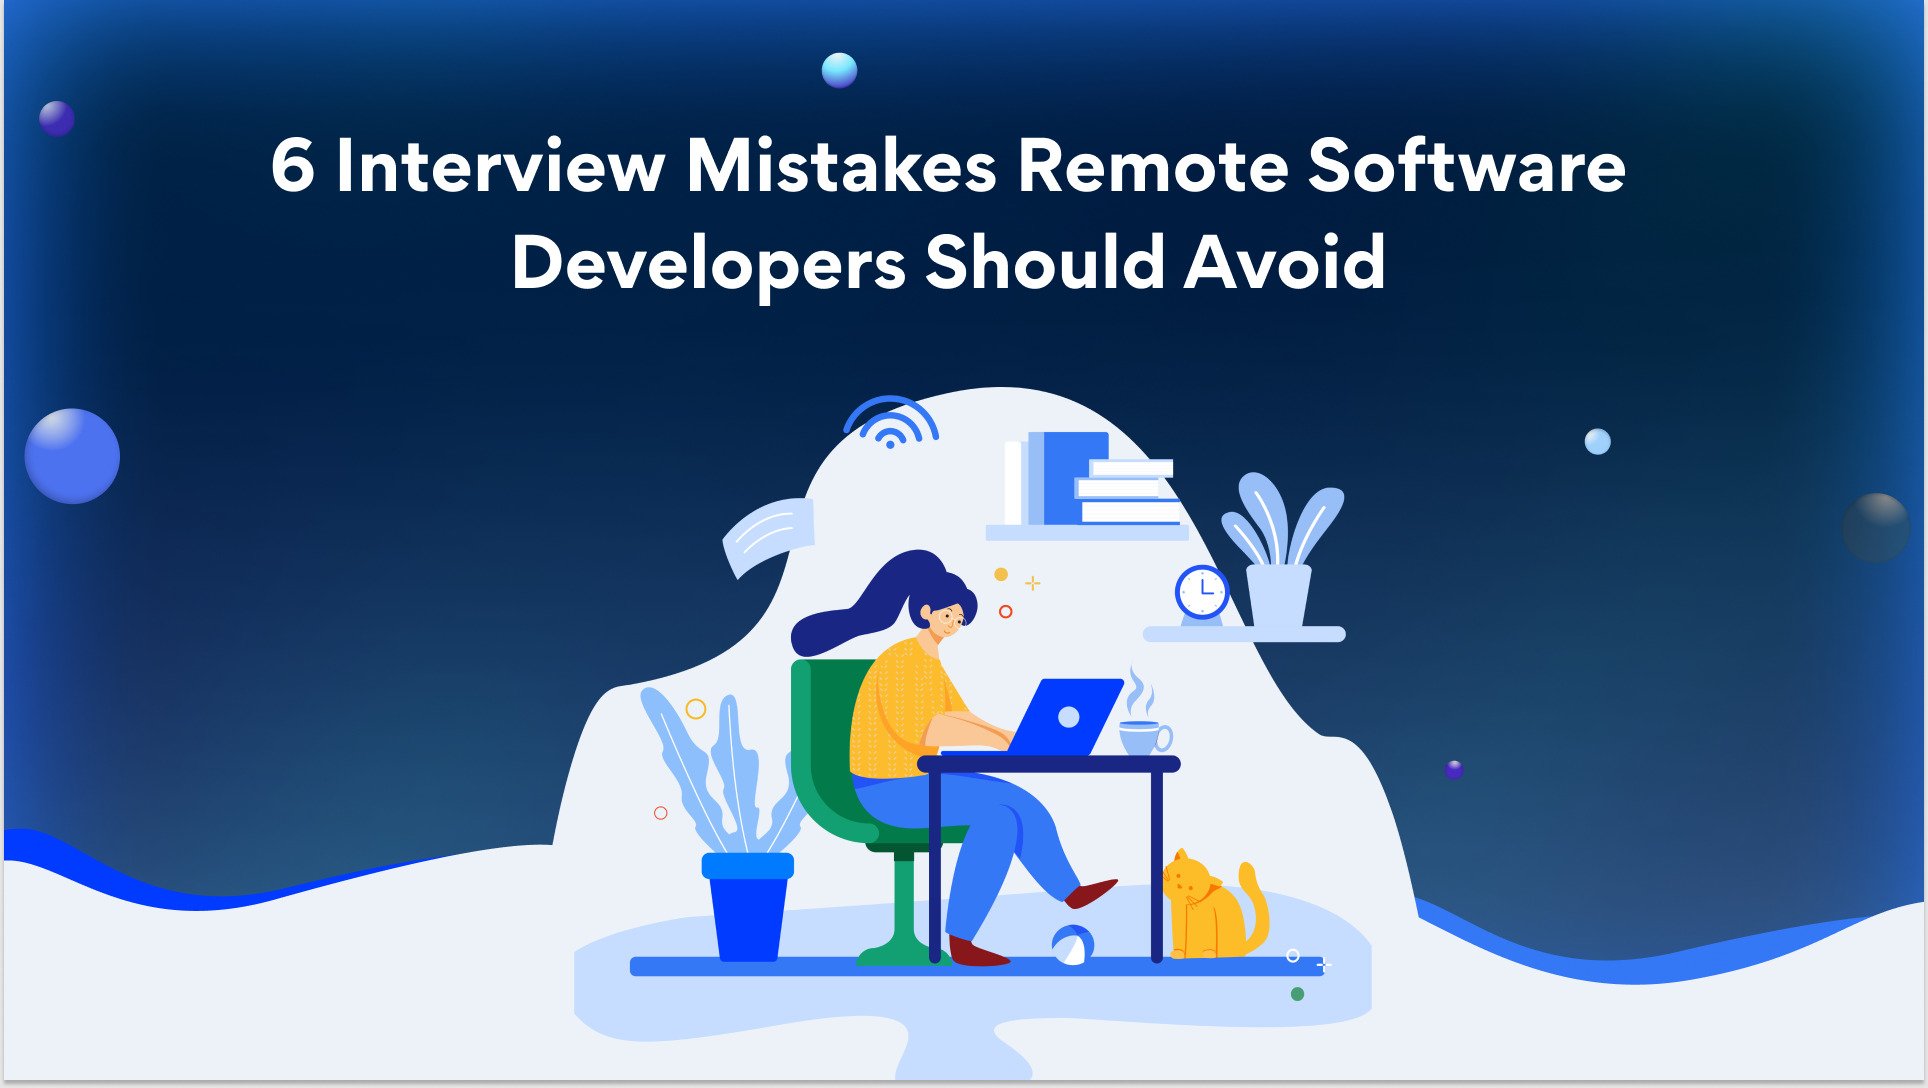 6 Interview Mistakes Remote Software Developers Should Avoid